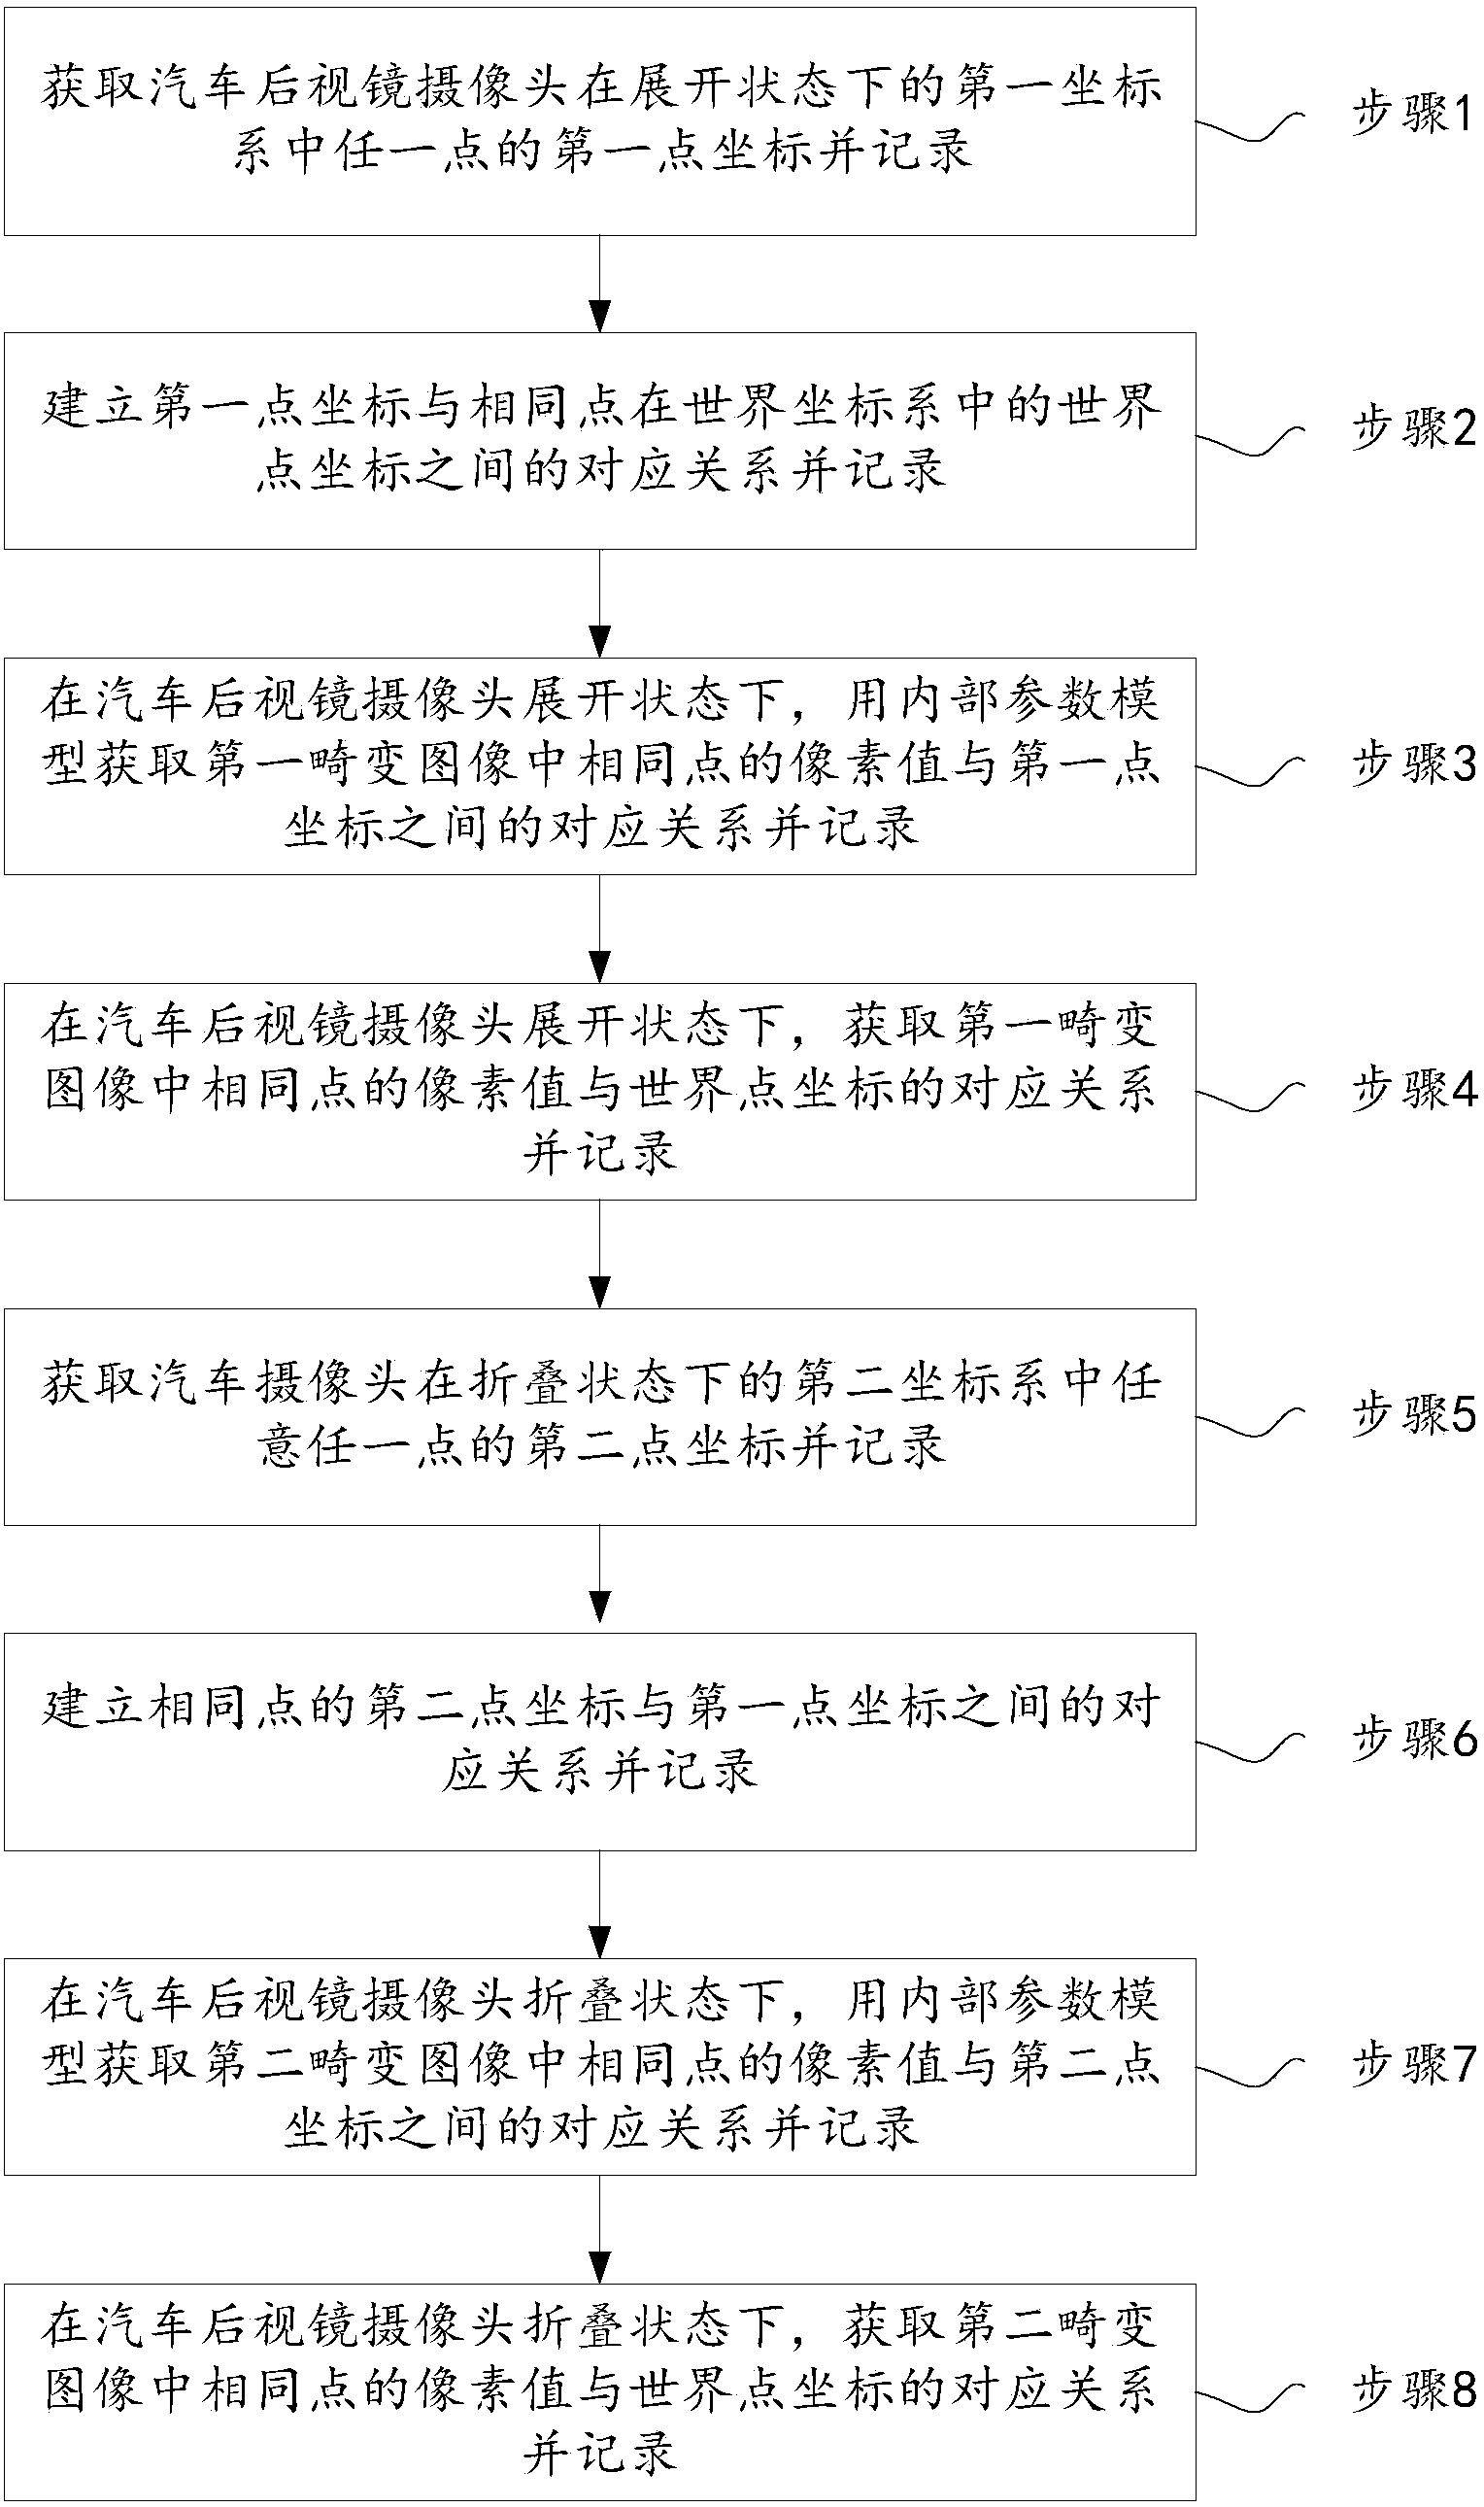 Picture synthesis calibration method